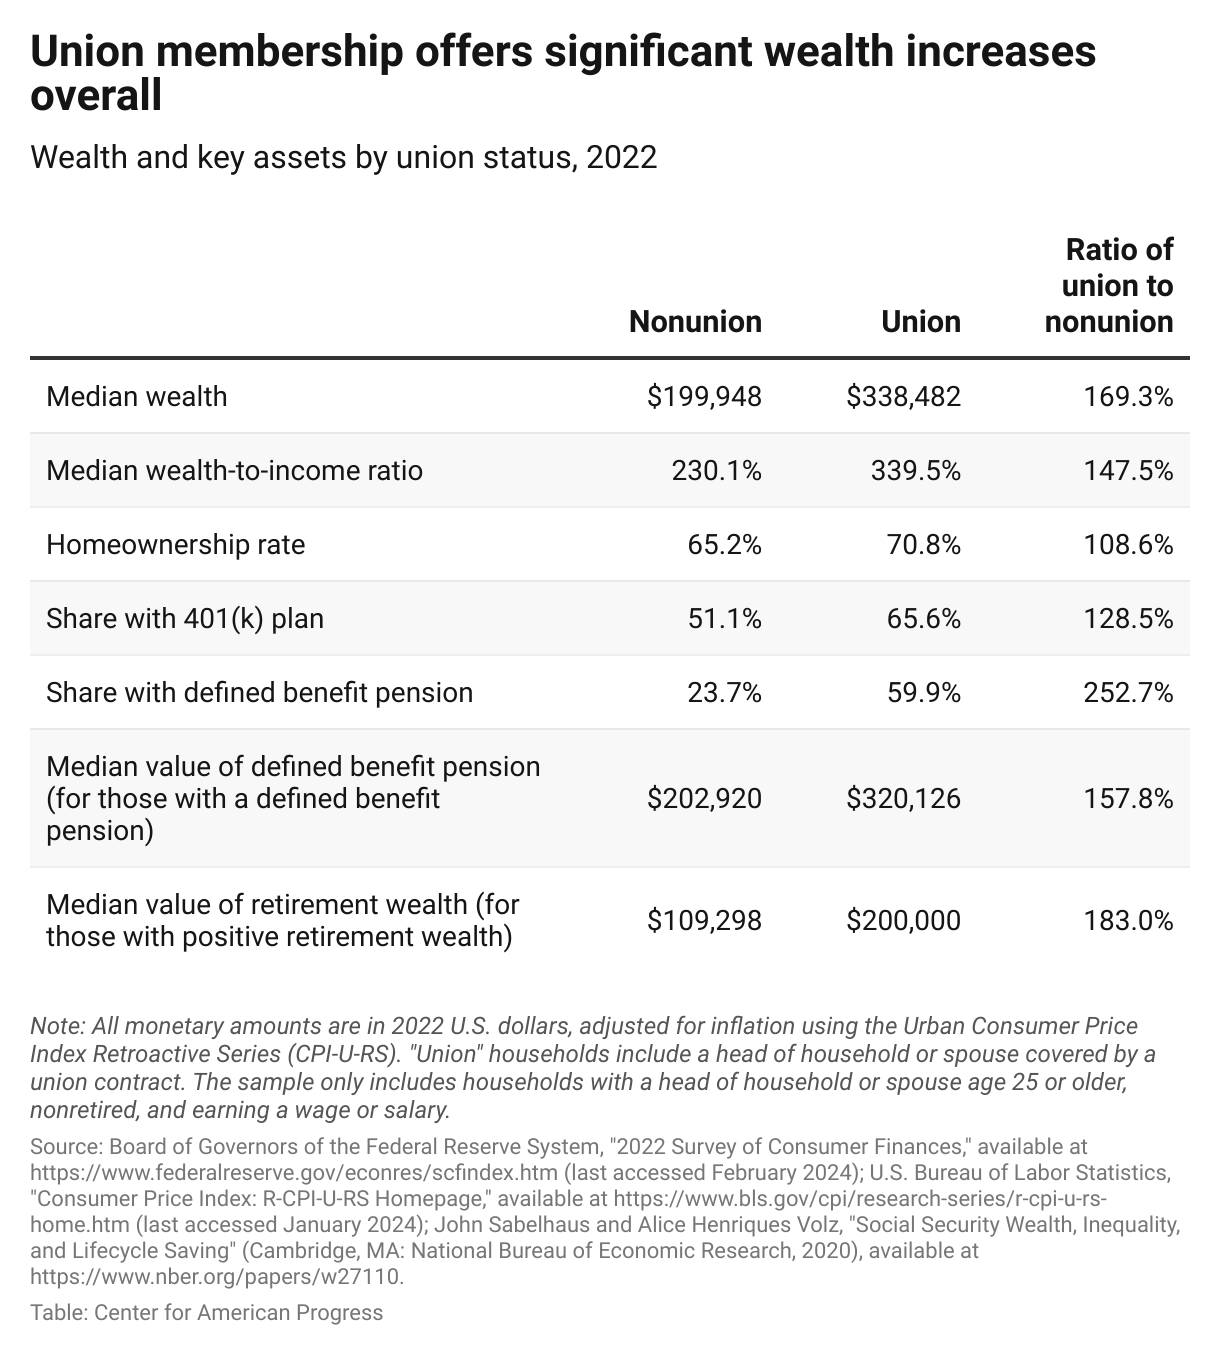 This table shows that union households have greater wealth across a range of assets, from homeownership rates to 401(k) plans.